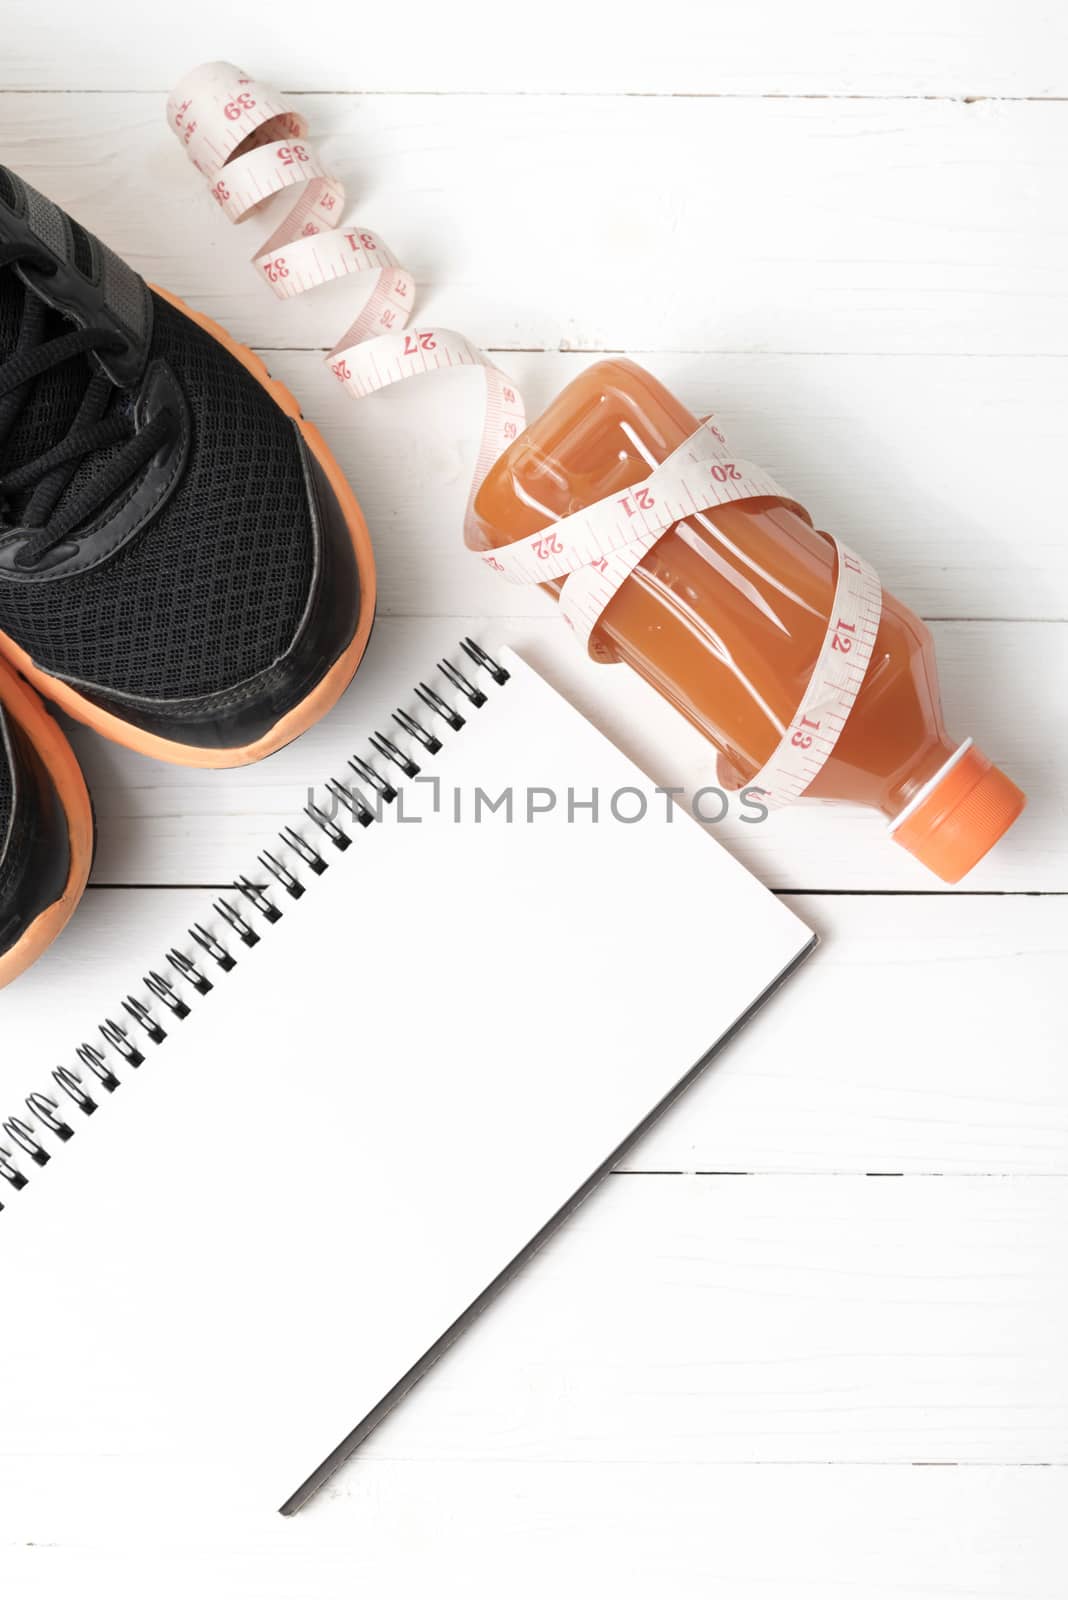 running shoes,orange juice,measuring tape and notepad by ammza12